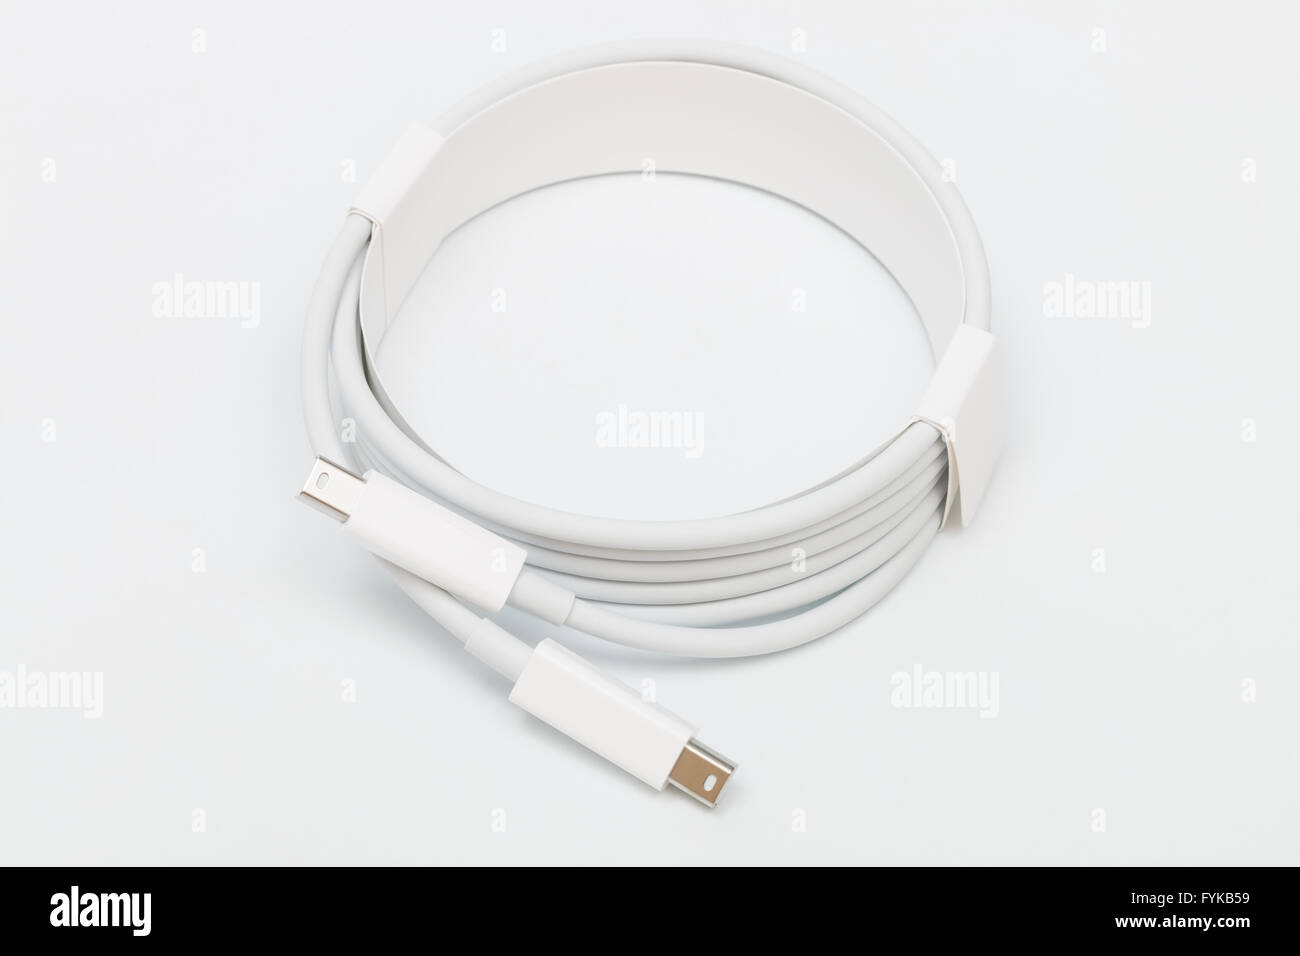 thunderbolt cable Stock Photo